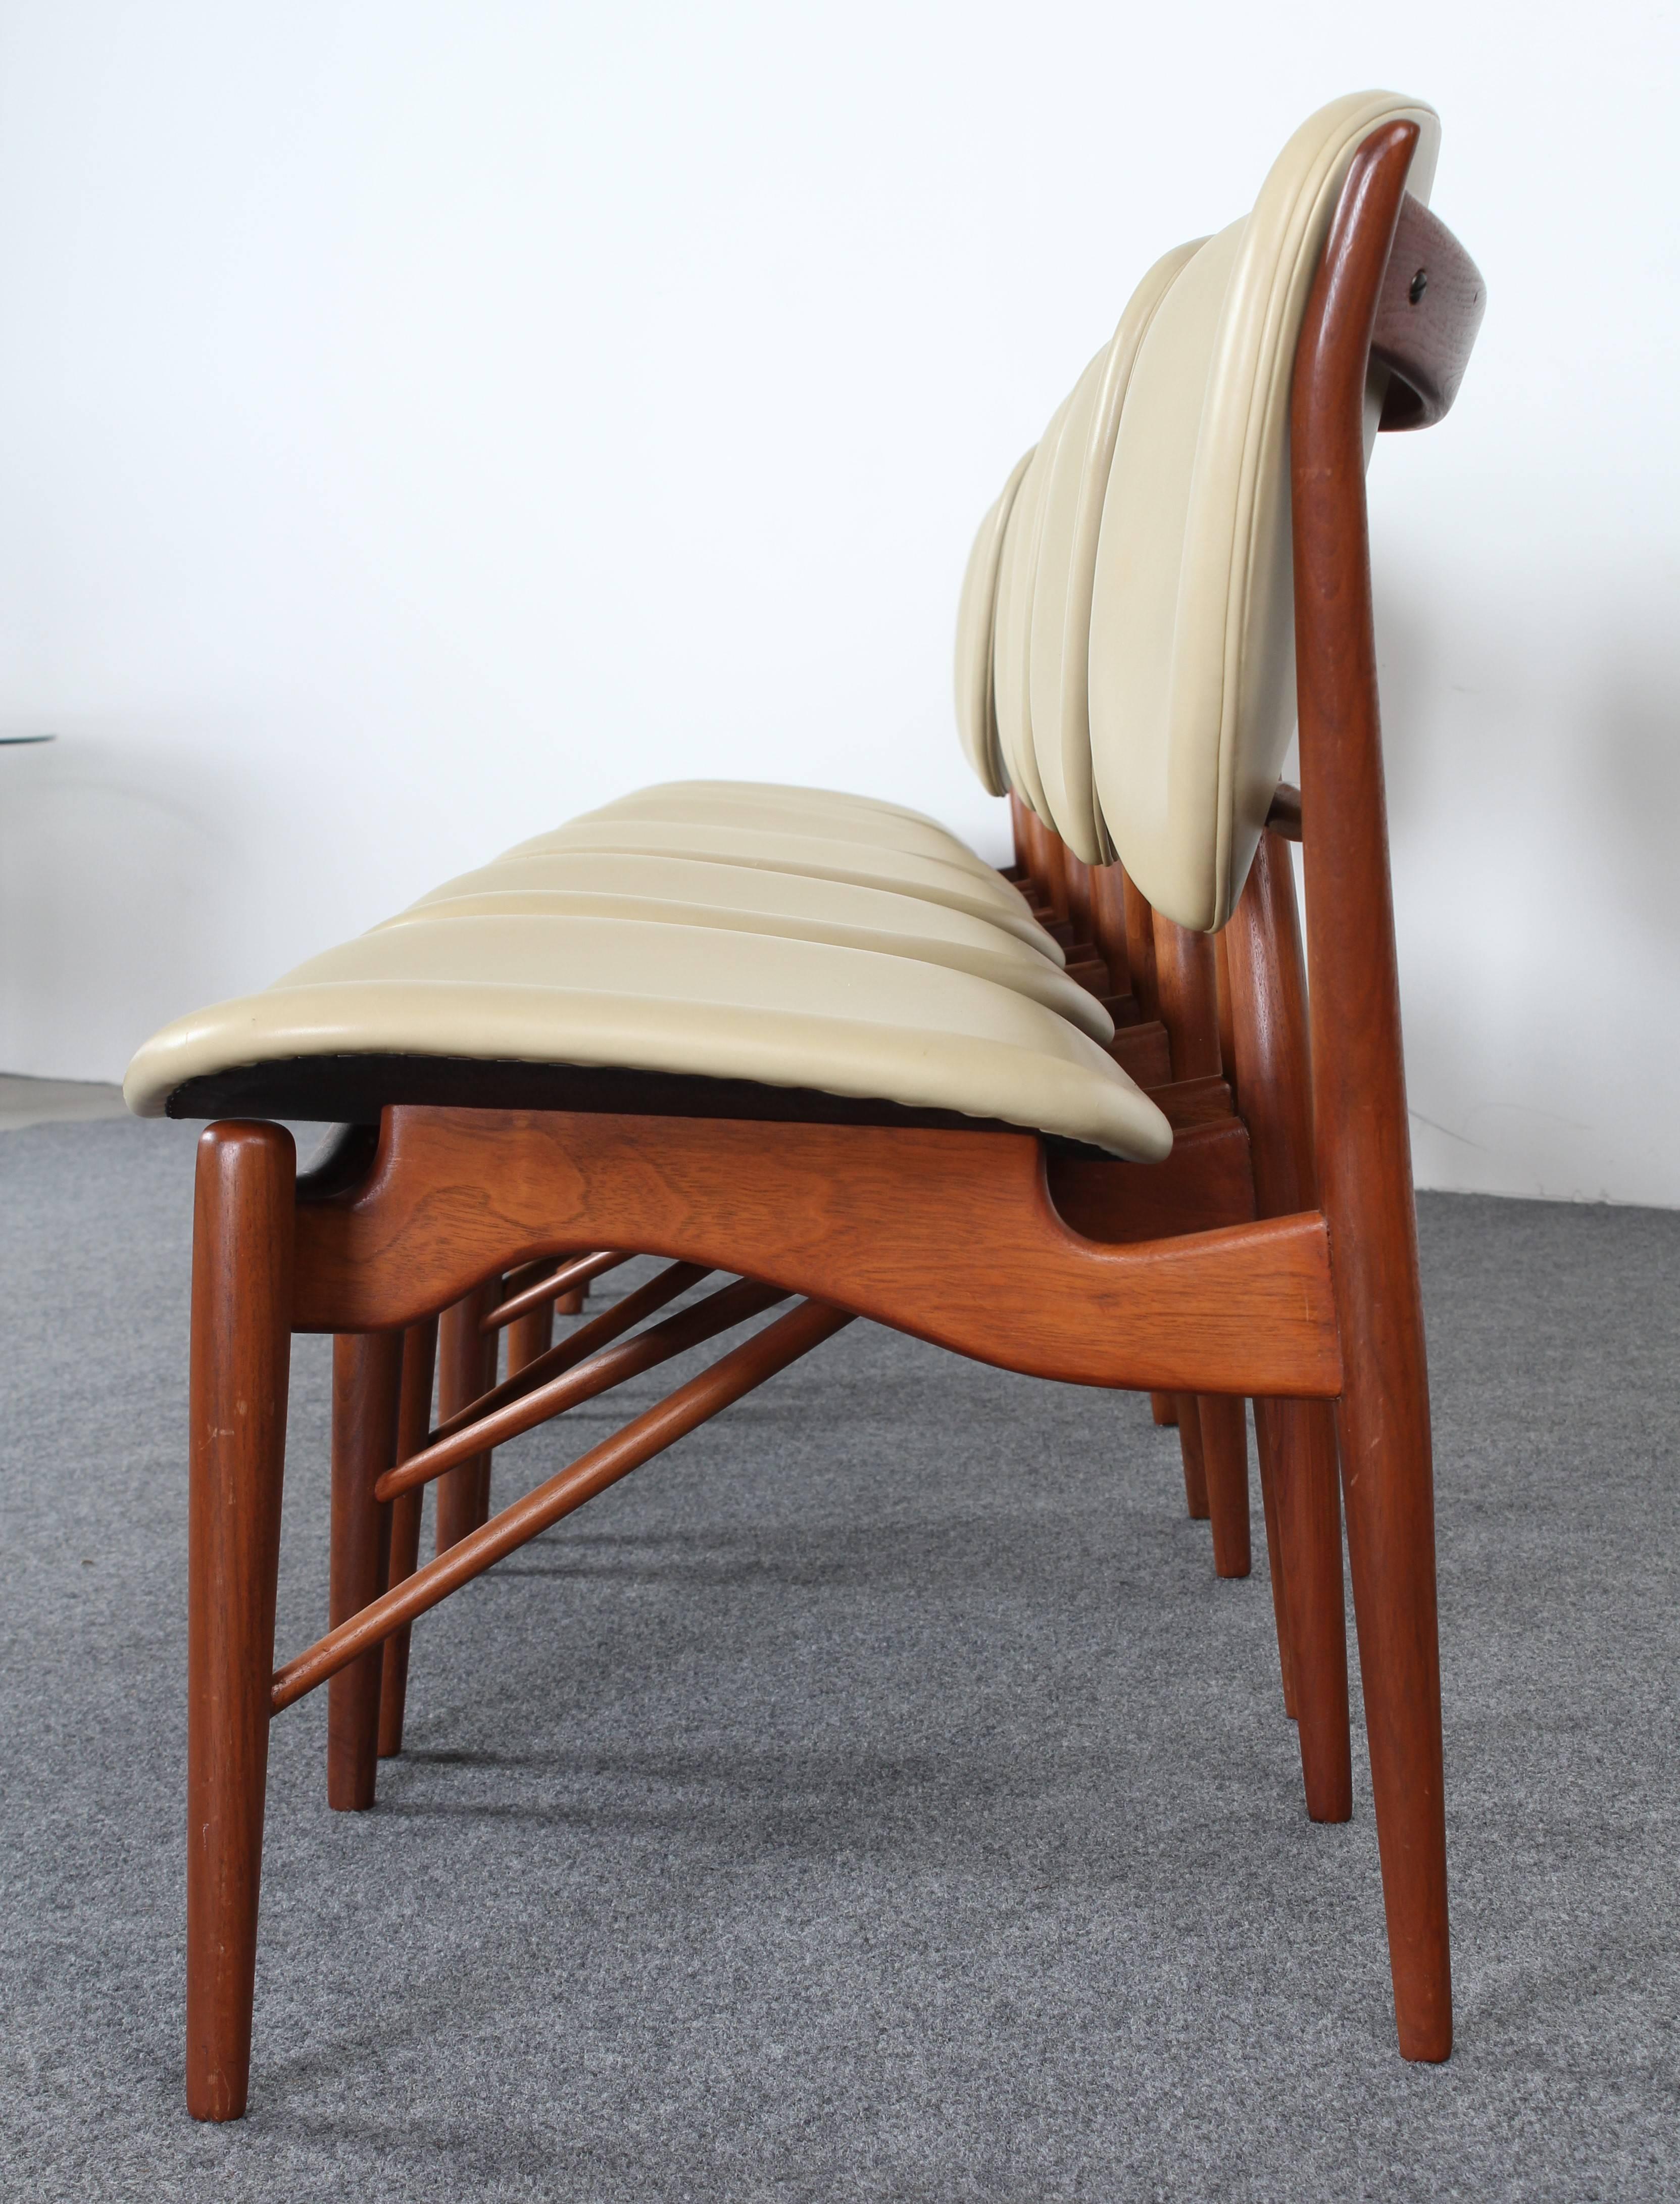 Set of six sculptural teak dining chairs designed by Finn Juhl NV-51 for Baker Furniture Company, circa 1960. These organic style chairs are well crafted and functional. Very good condition with age appropriate wear.

Dimensions: 22